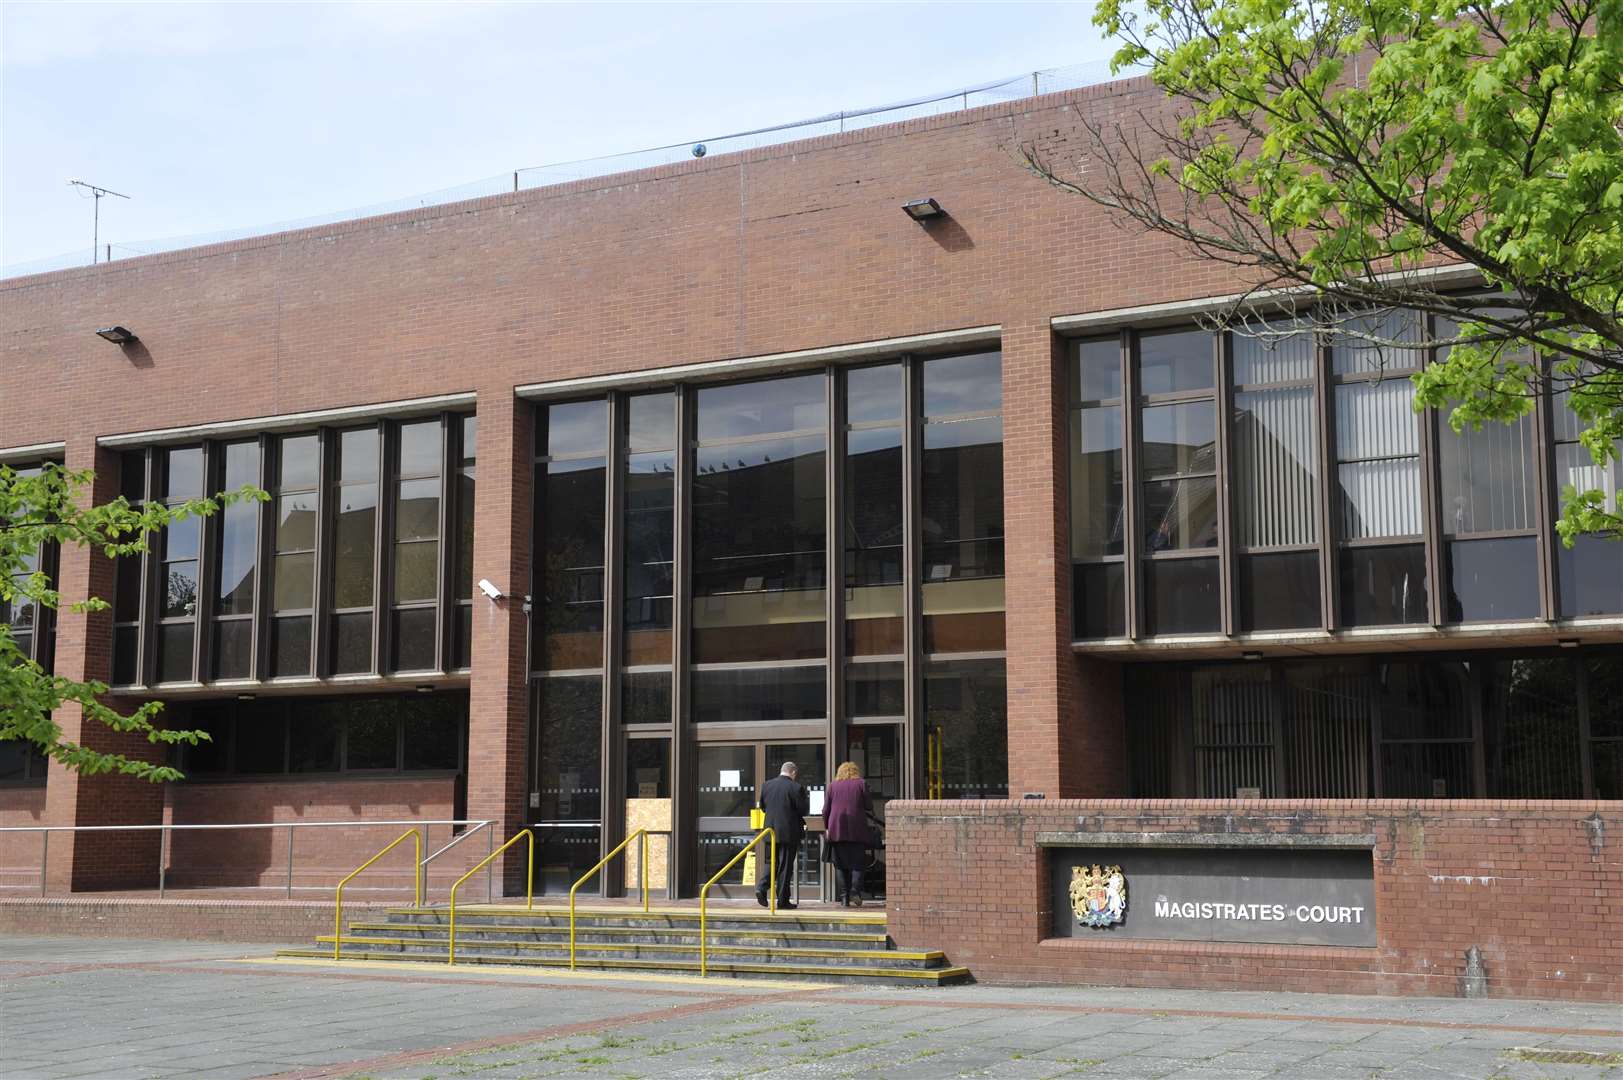 Wilson appeared at Folkestone Magistrates' Court